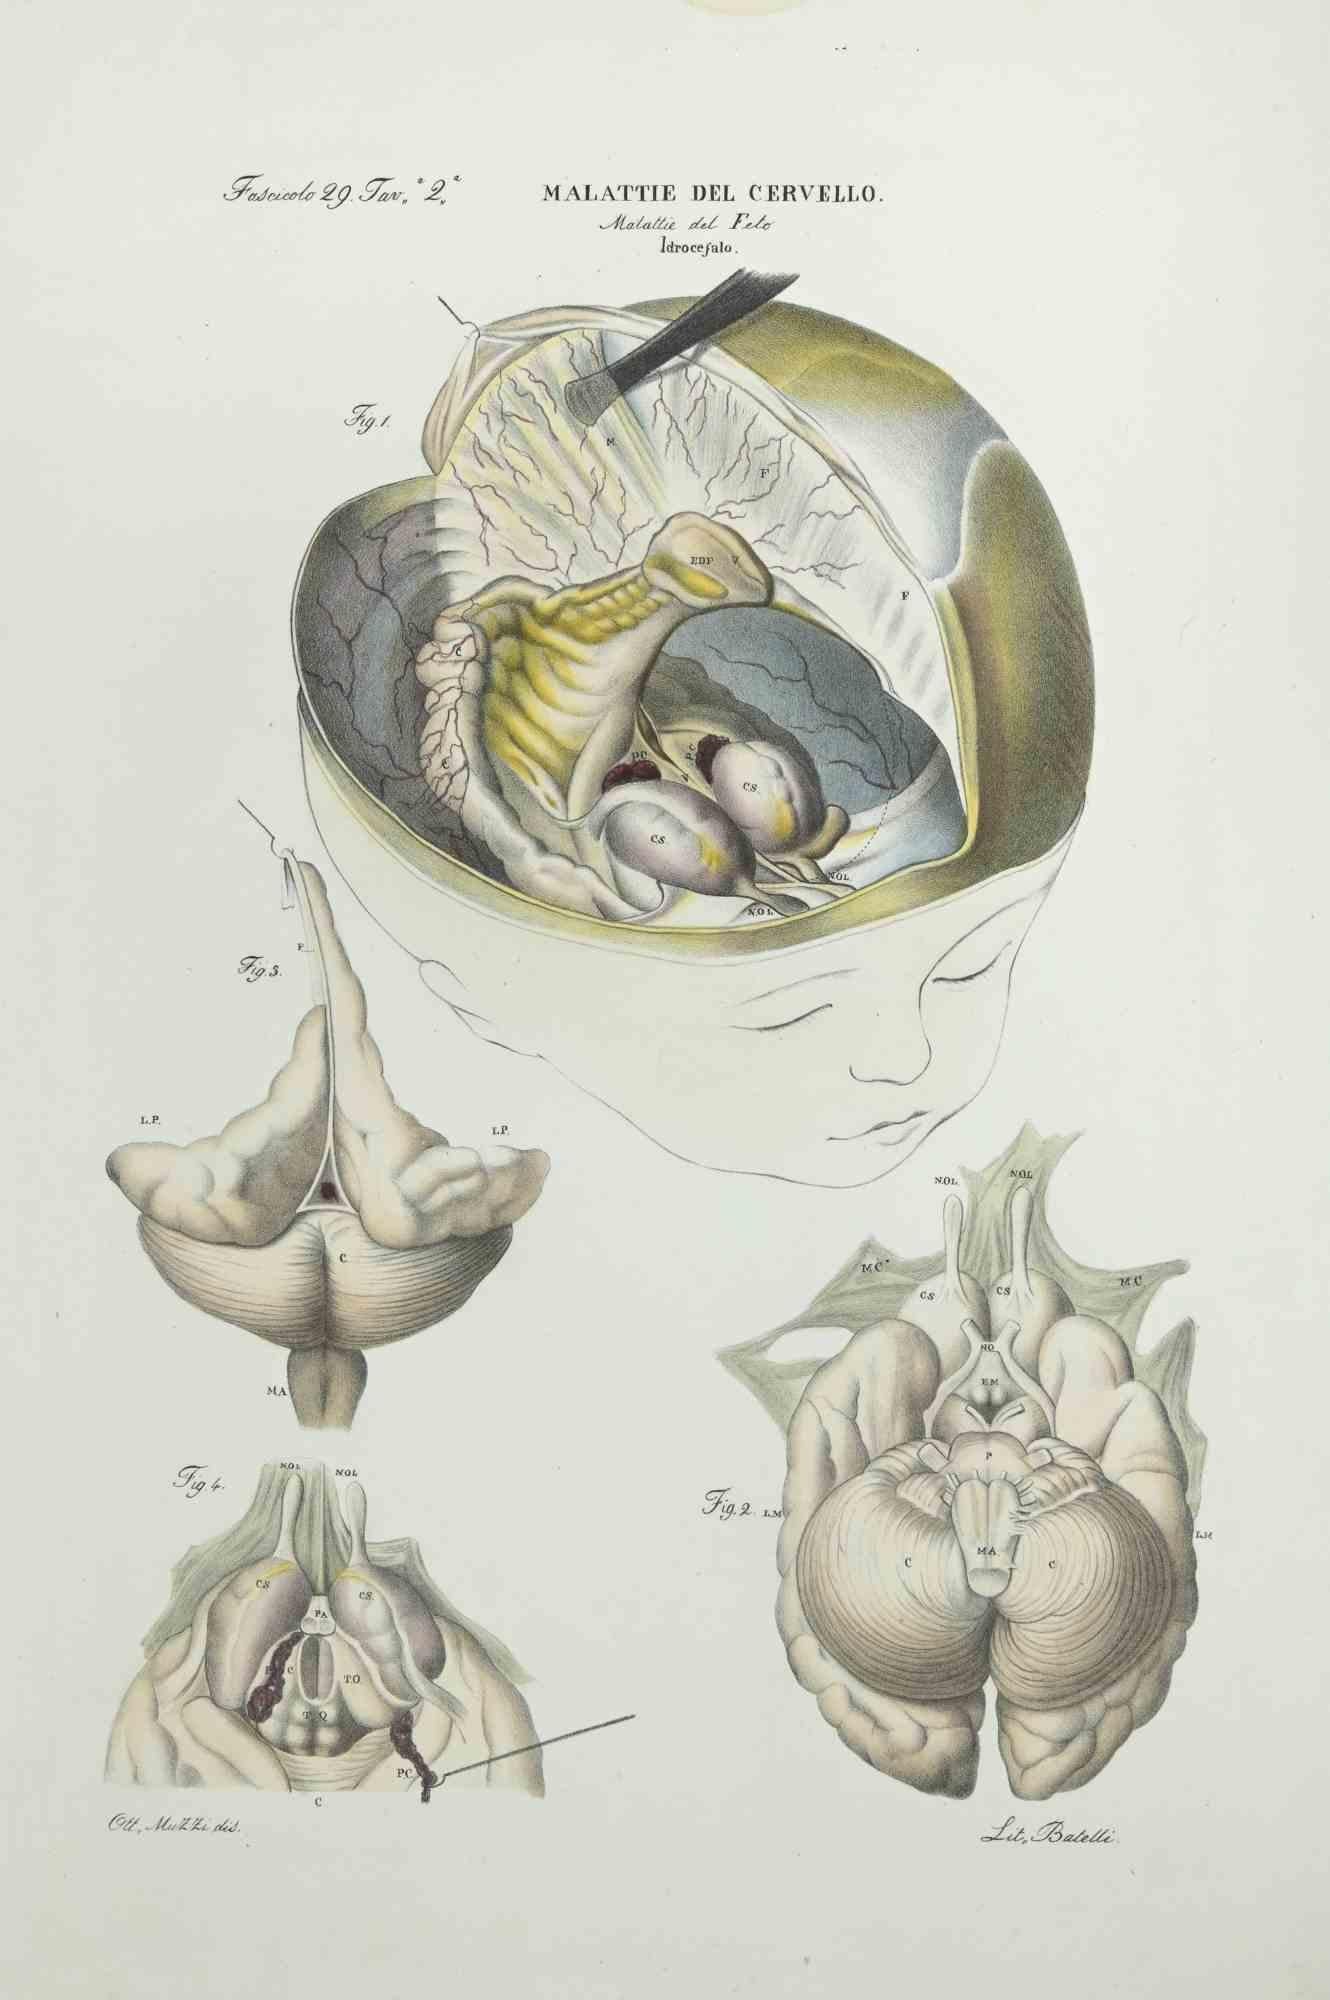 Brain Diseases is a lithograph hand colored by Ottavio Muzzi for the edition of Antoine Chazal,Human Anatomy, Printers Batelli and Ridolfi, realized in 1843.

Signed on plate on the lower left margin.

The artwork belongs to the "Atlante Generale